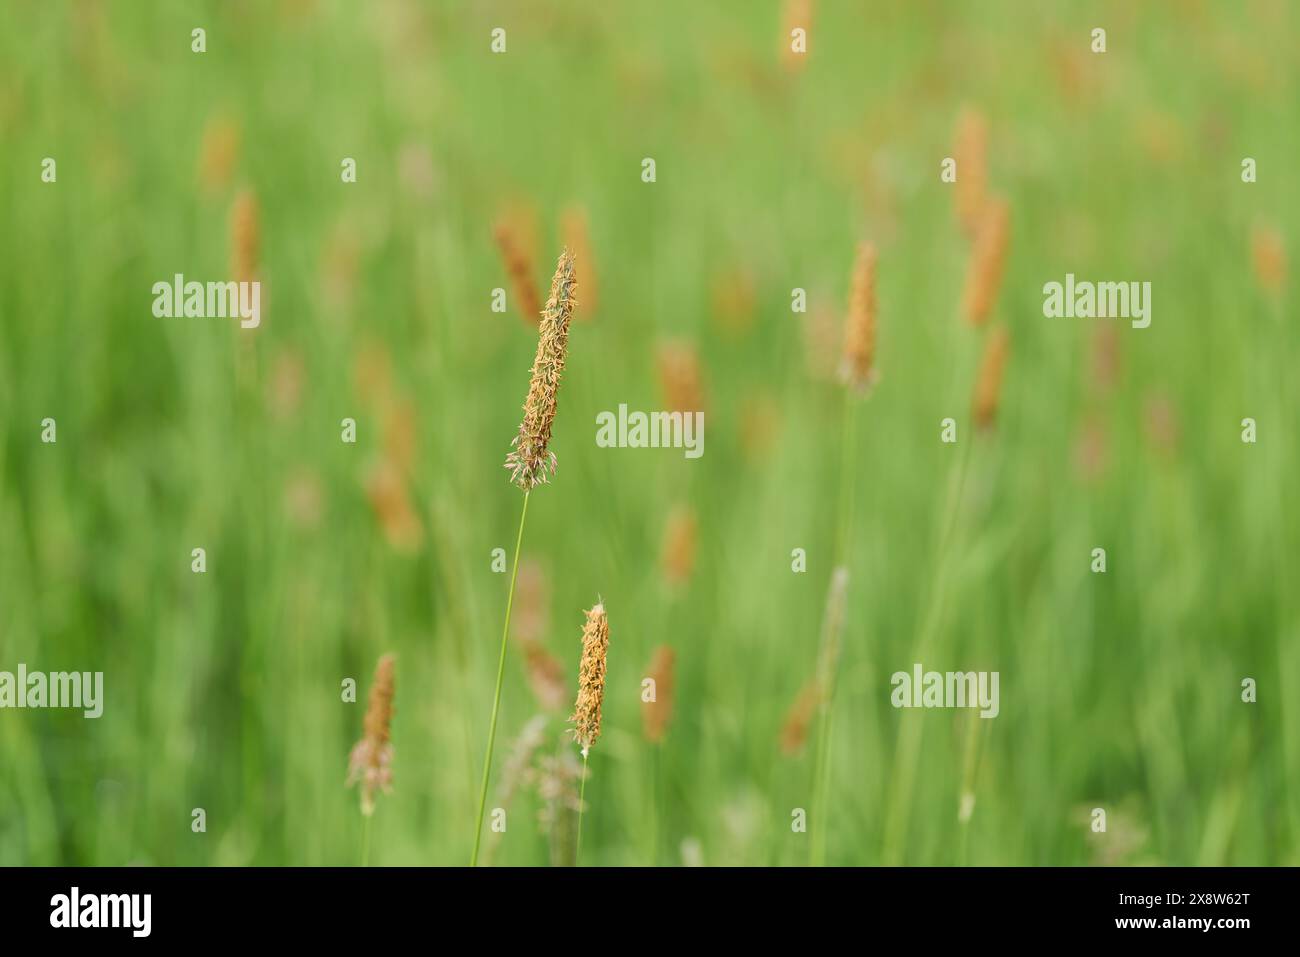 Flowering grasses, Meadow foxtail, Alopecurus pratensis, on a green meadow in spring Stock Photo